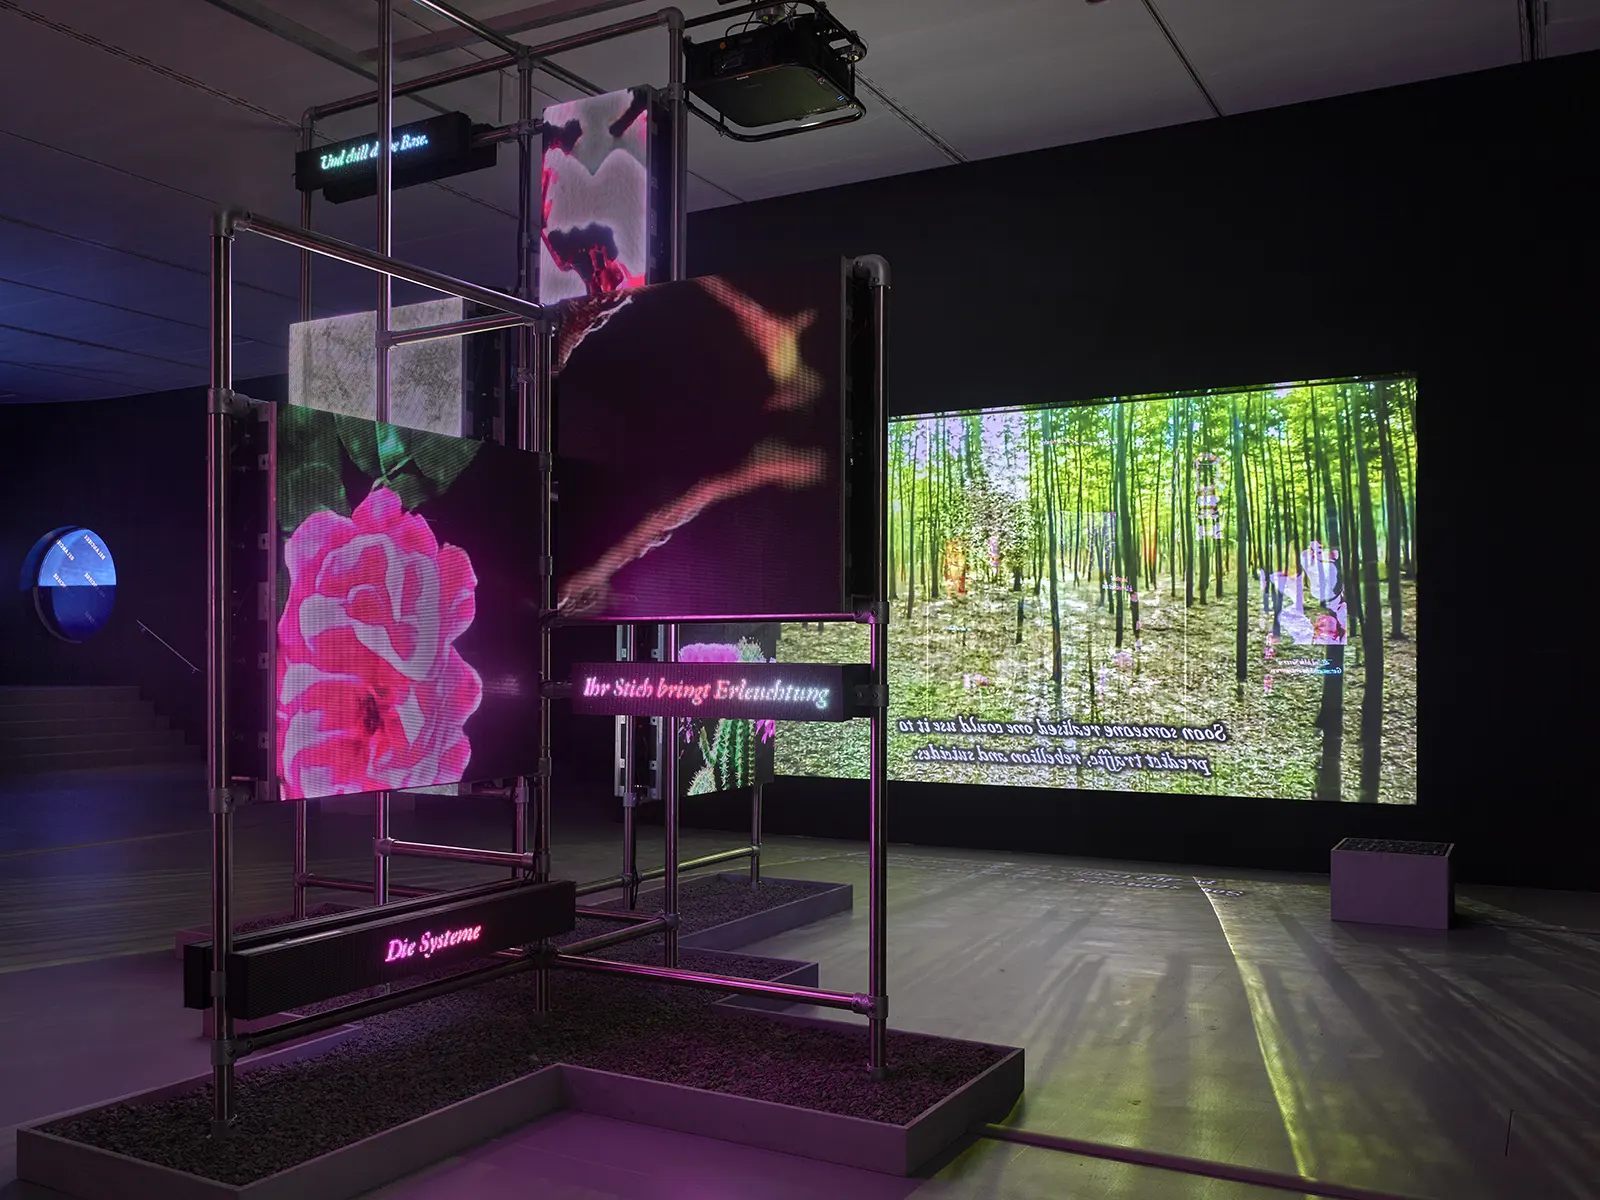 Hito Steyerl, This is the Future, 2019, Video installation, environment.